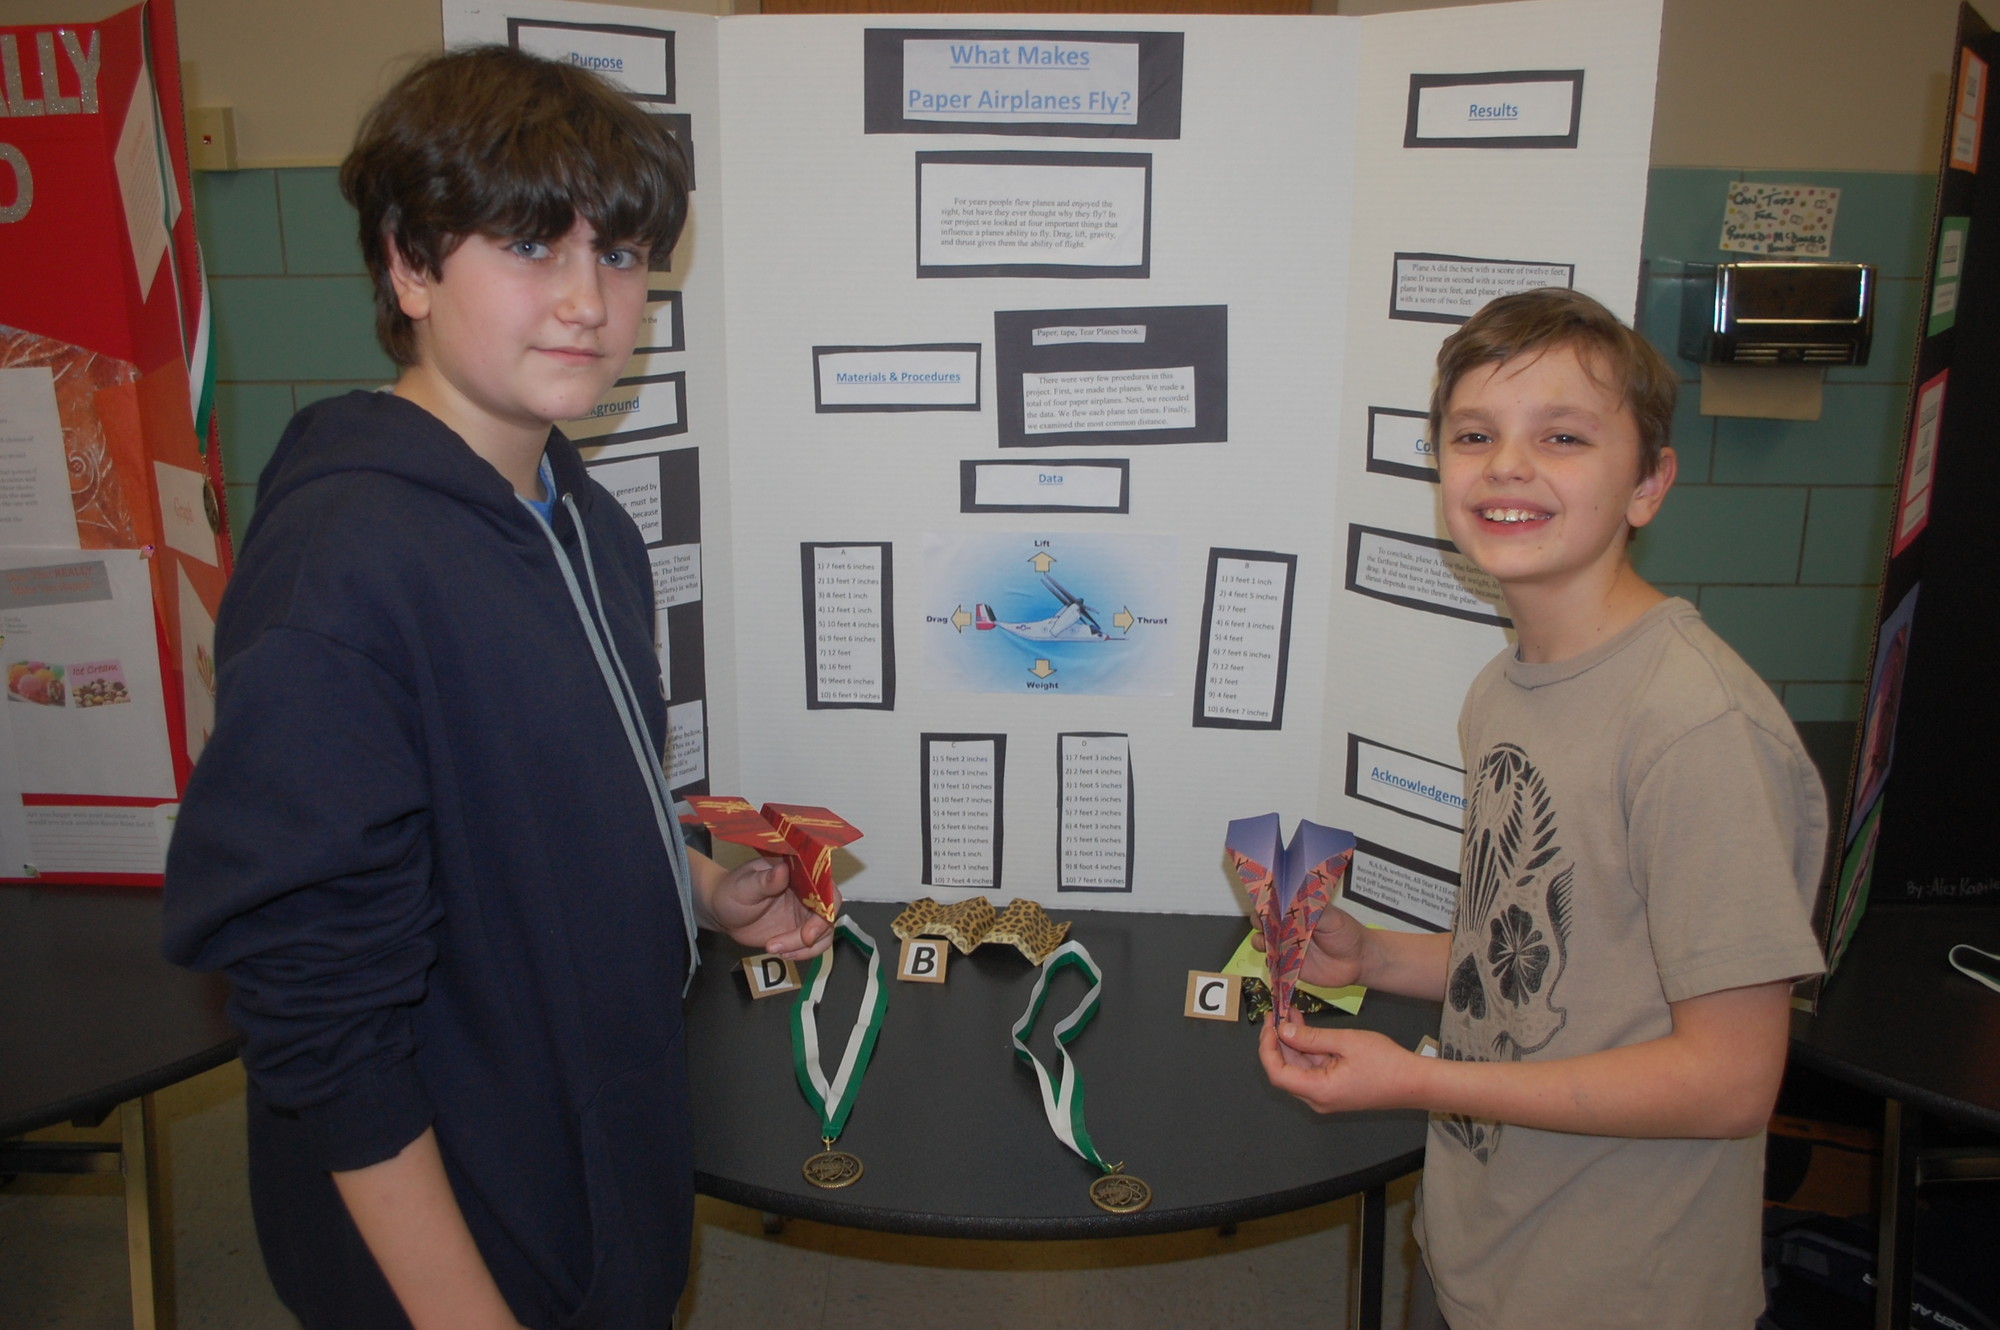 Joseph Randazzo and Andrew Calvacca presented their findings from their paper airplane experiment at Seaford Middle School’s science fair on Feb. 12.